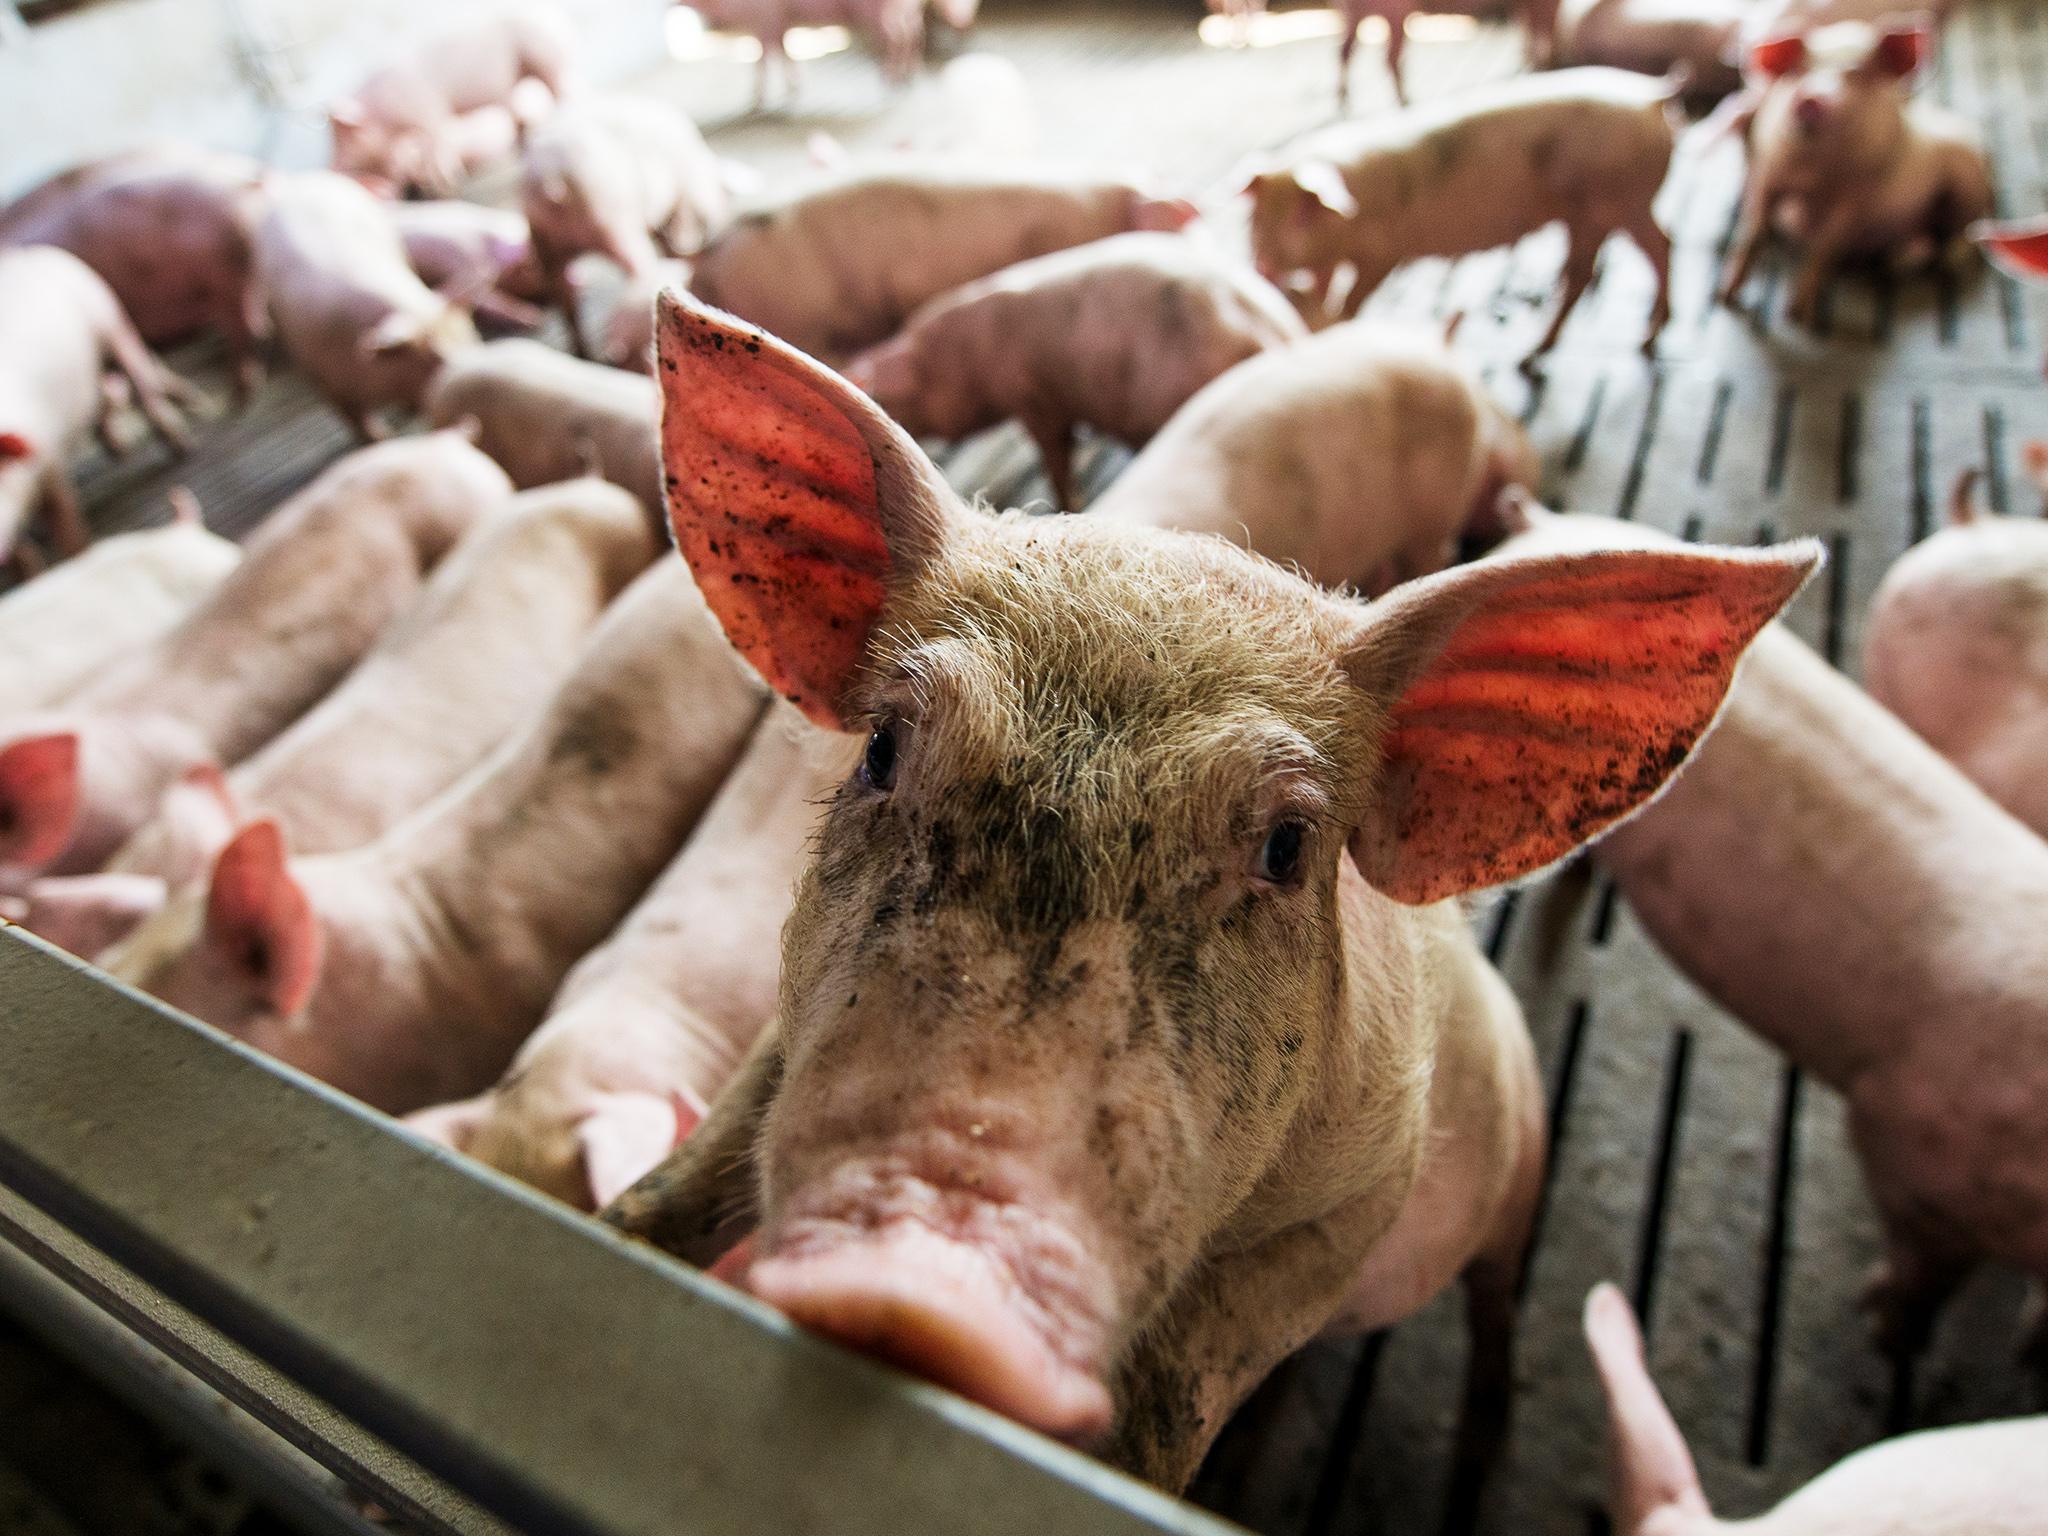 Almost 29 million farm animals were sent for slaughter in 2019